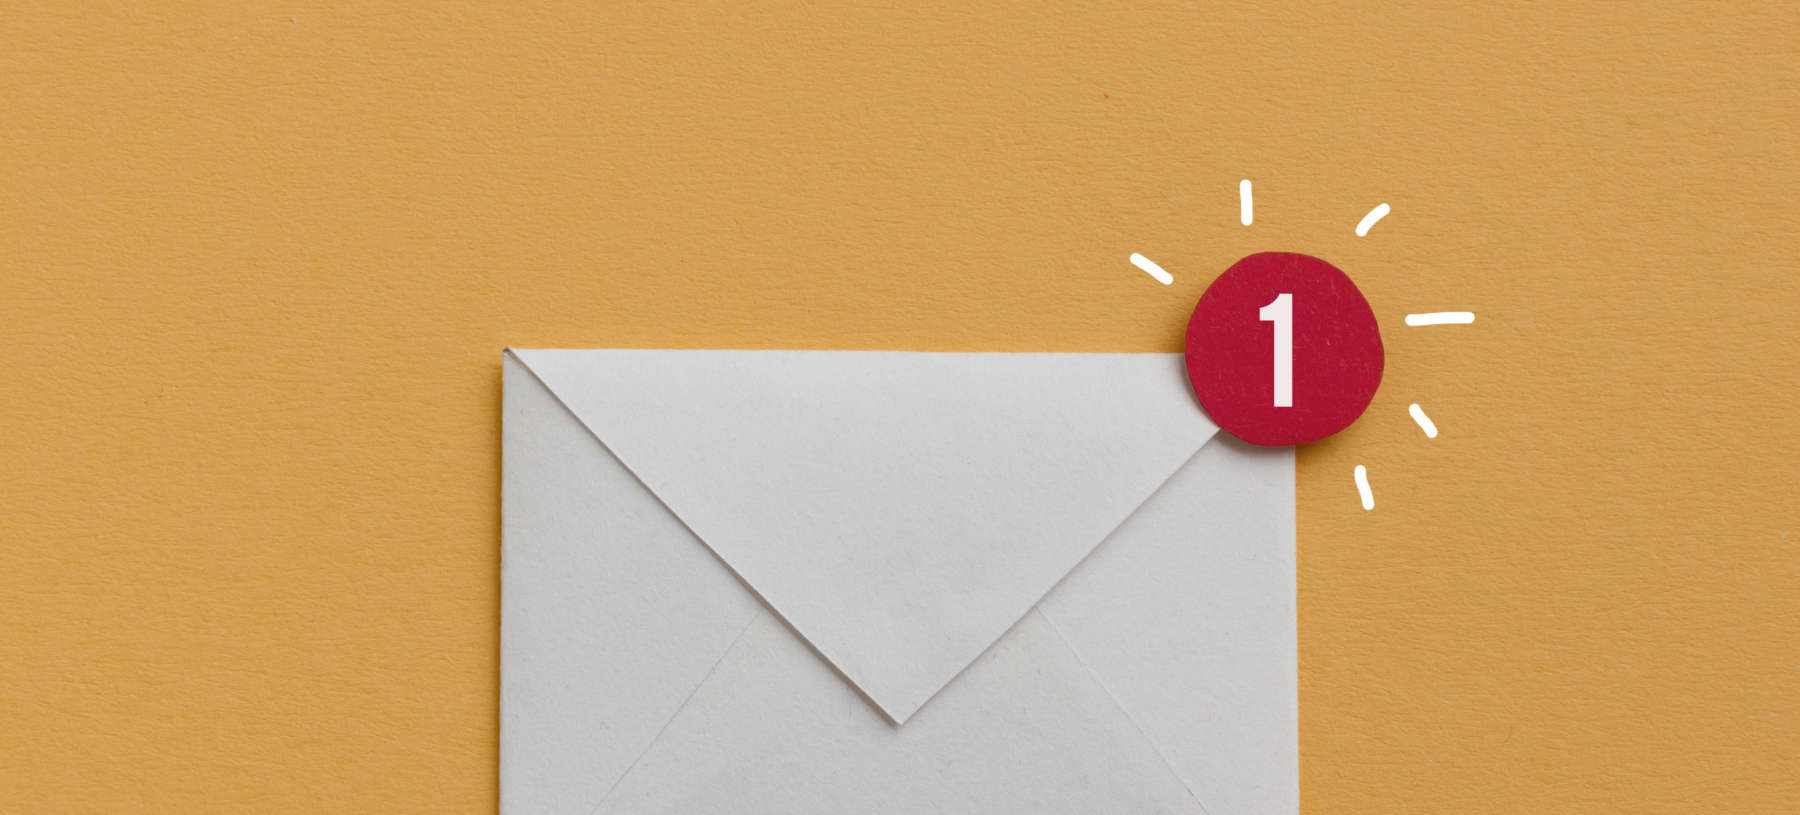 Win Back Email Campaigns: Learn How To Re-engage Relapsed Members